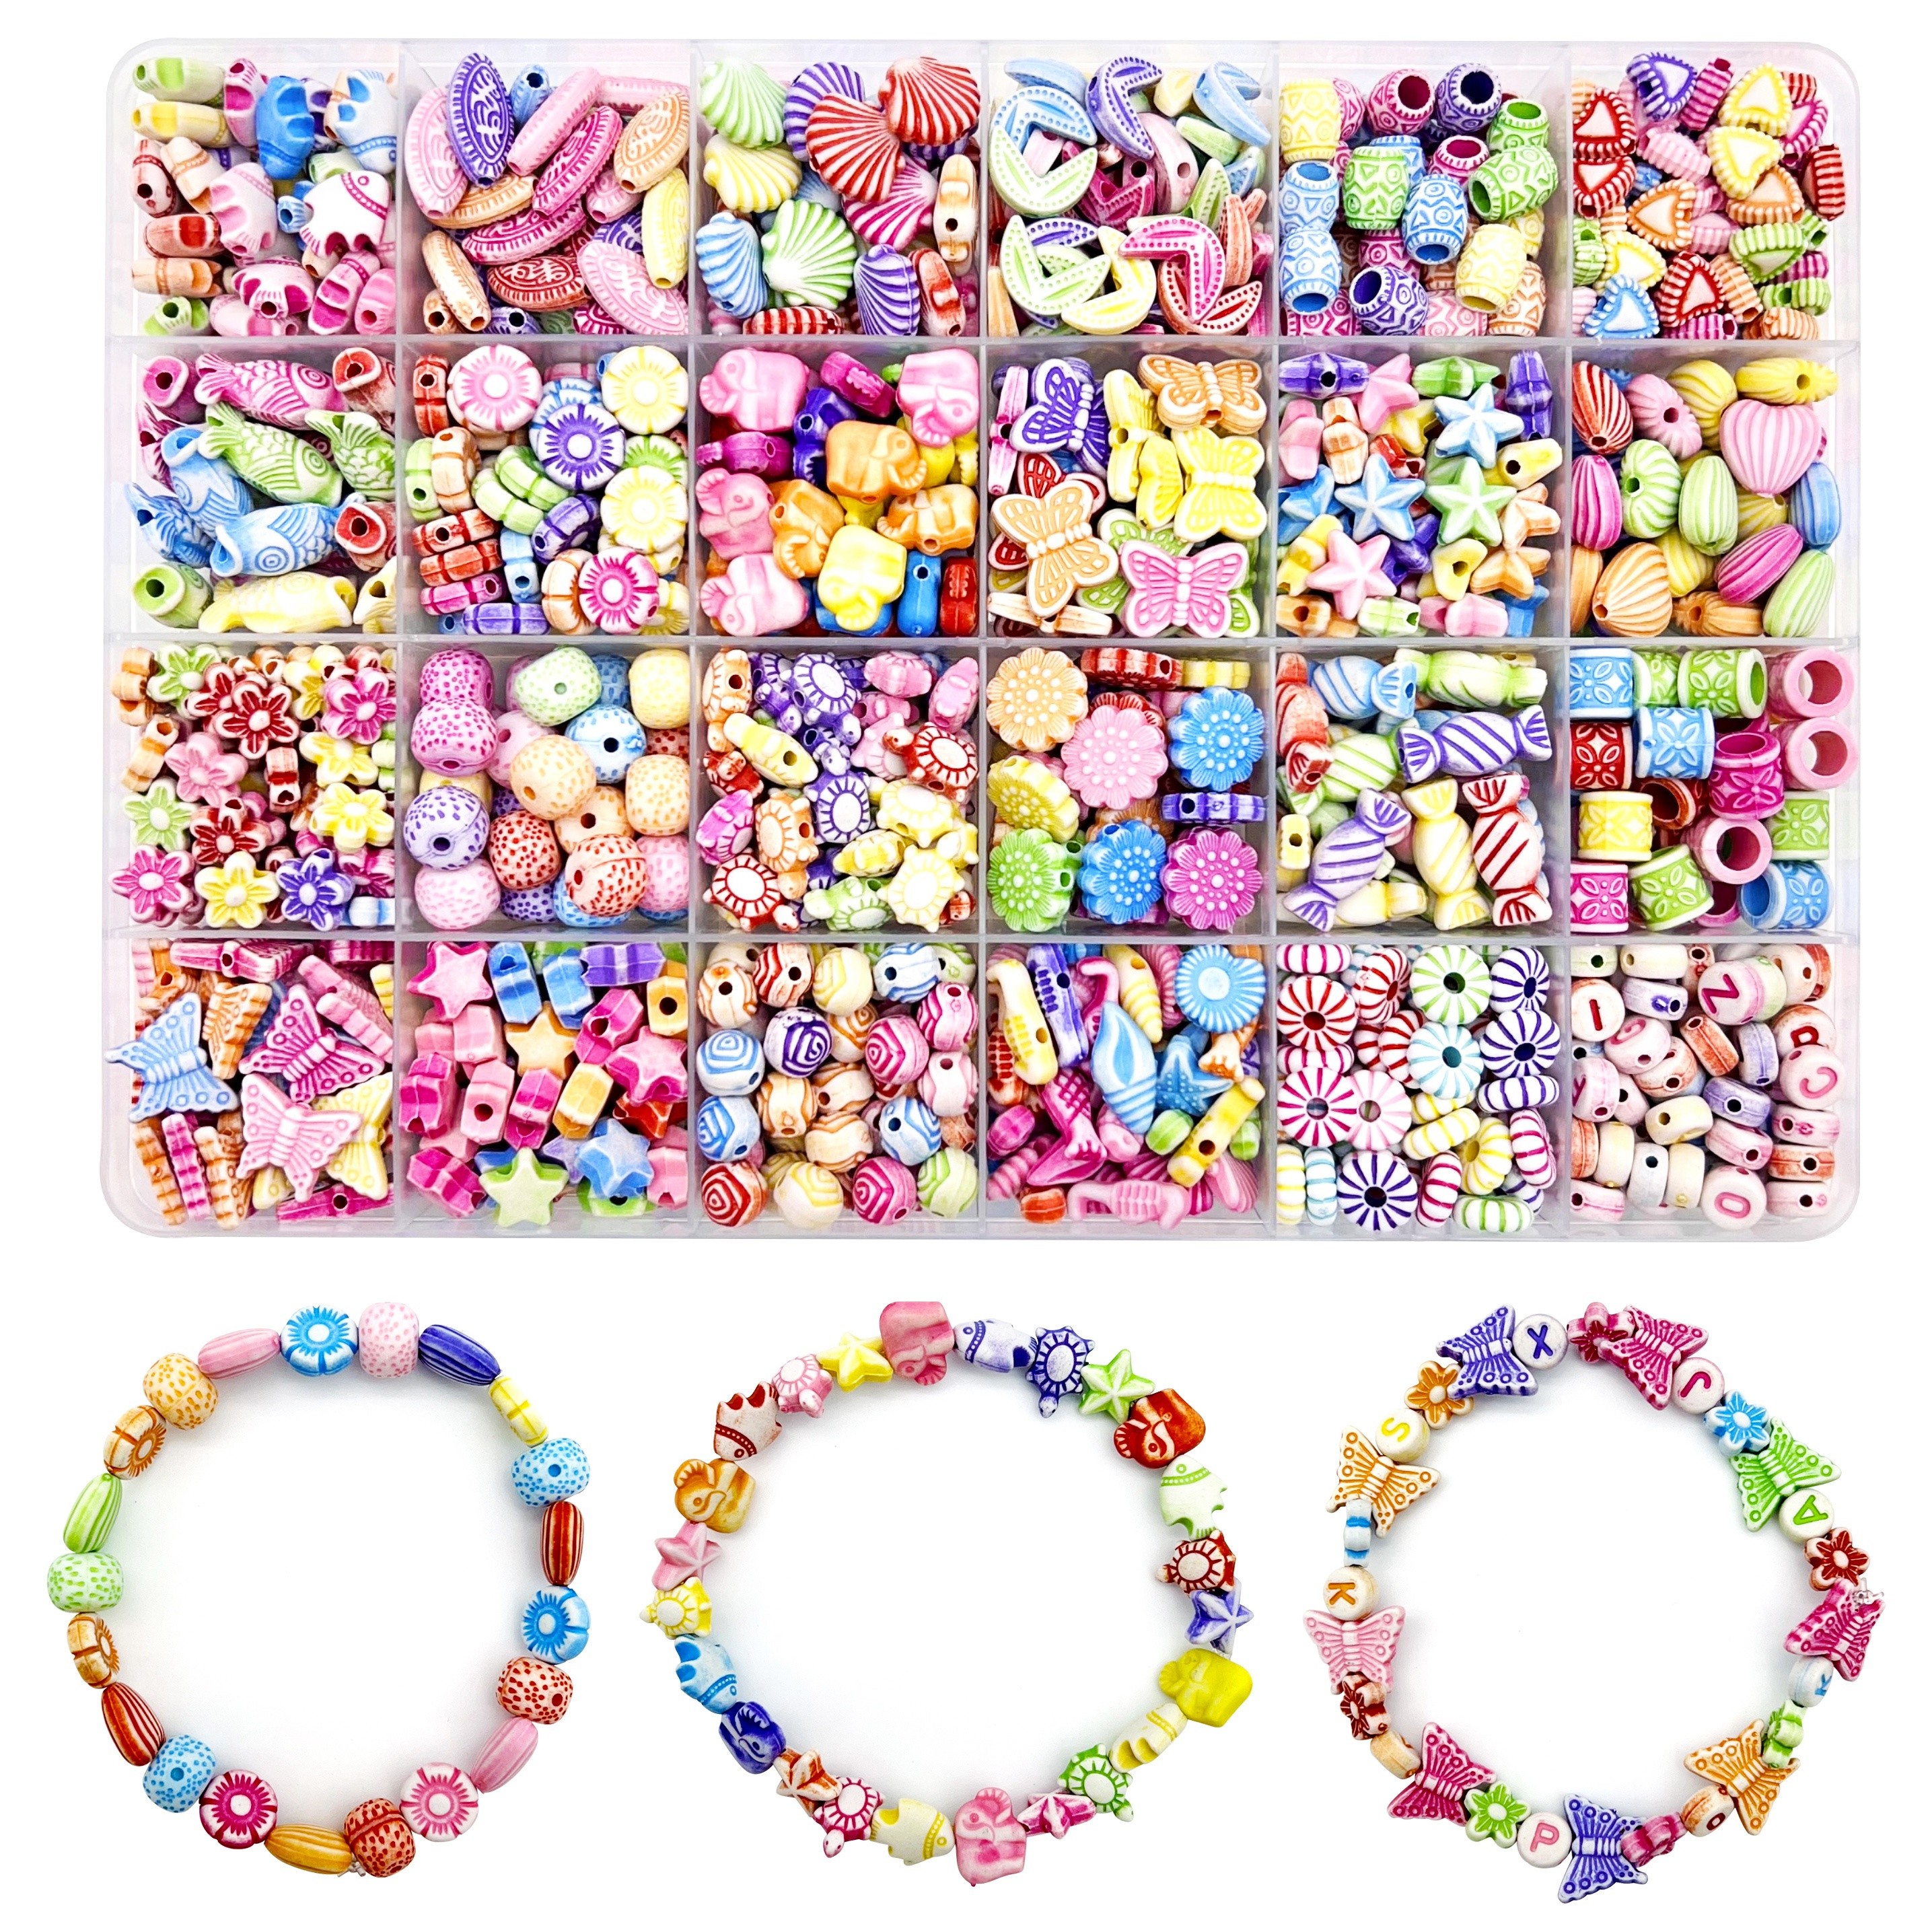 

24-compartment Box Of Ocean World Themed Colorful Acrylic Beads - Assorted Fun Shapes Including Butterflies, Stars, Hearts, And Flowers For Diy Bracelets, Necklaces, And Jewelry Crafts